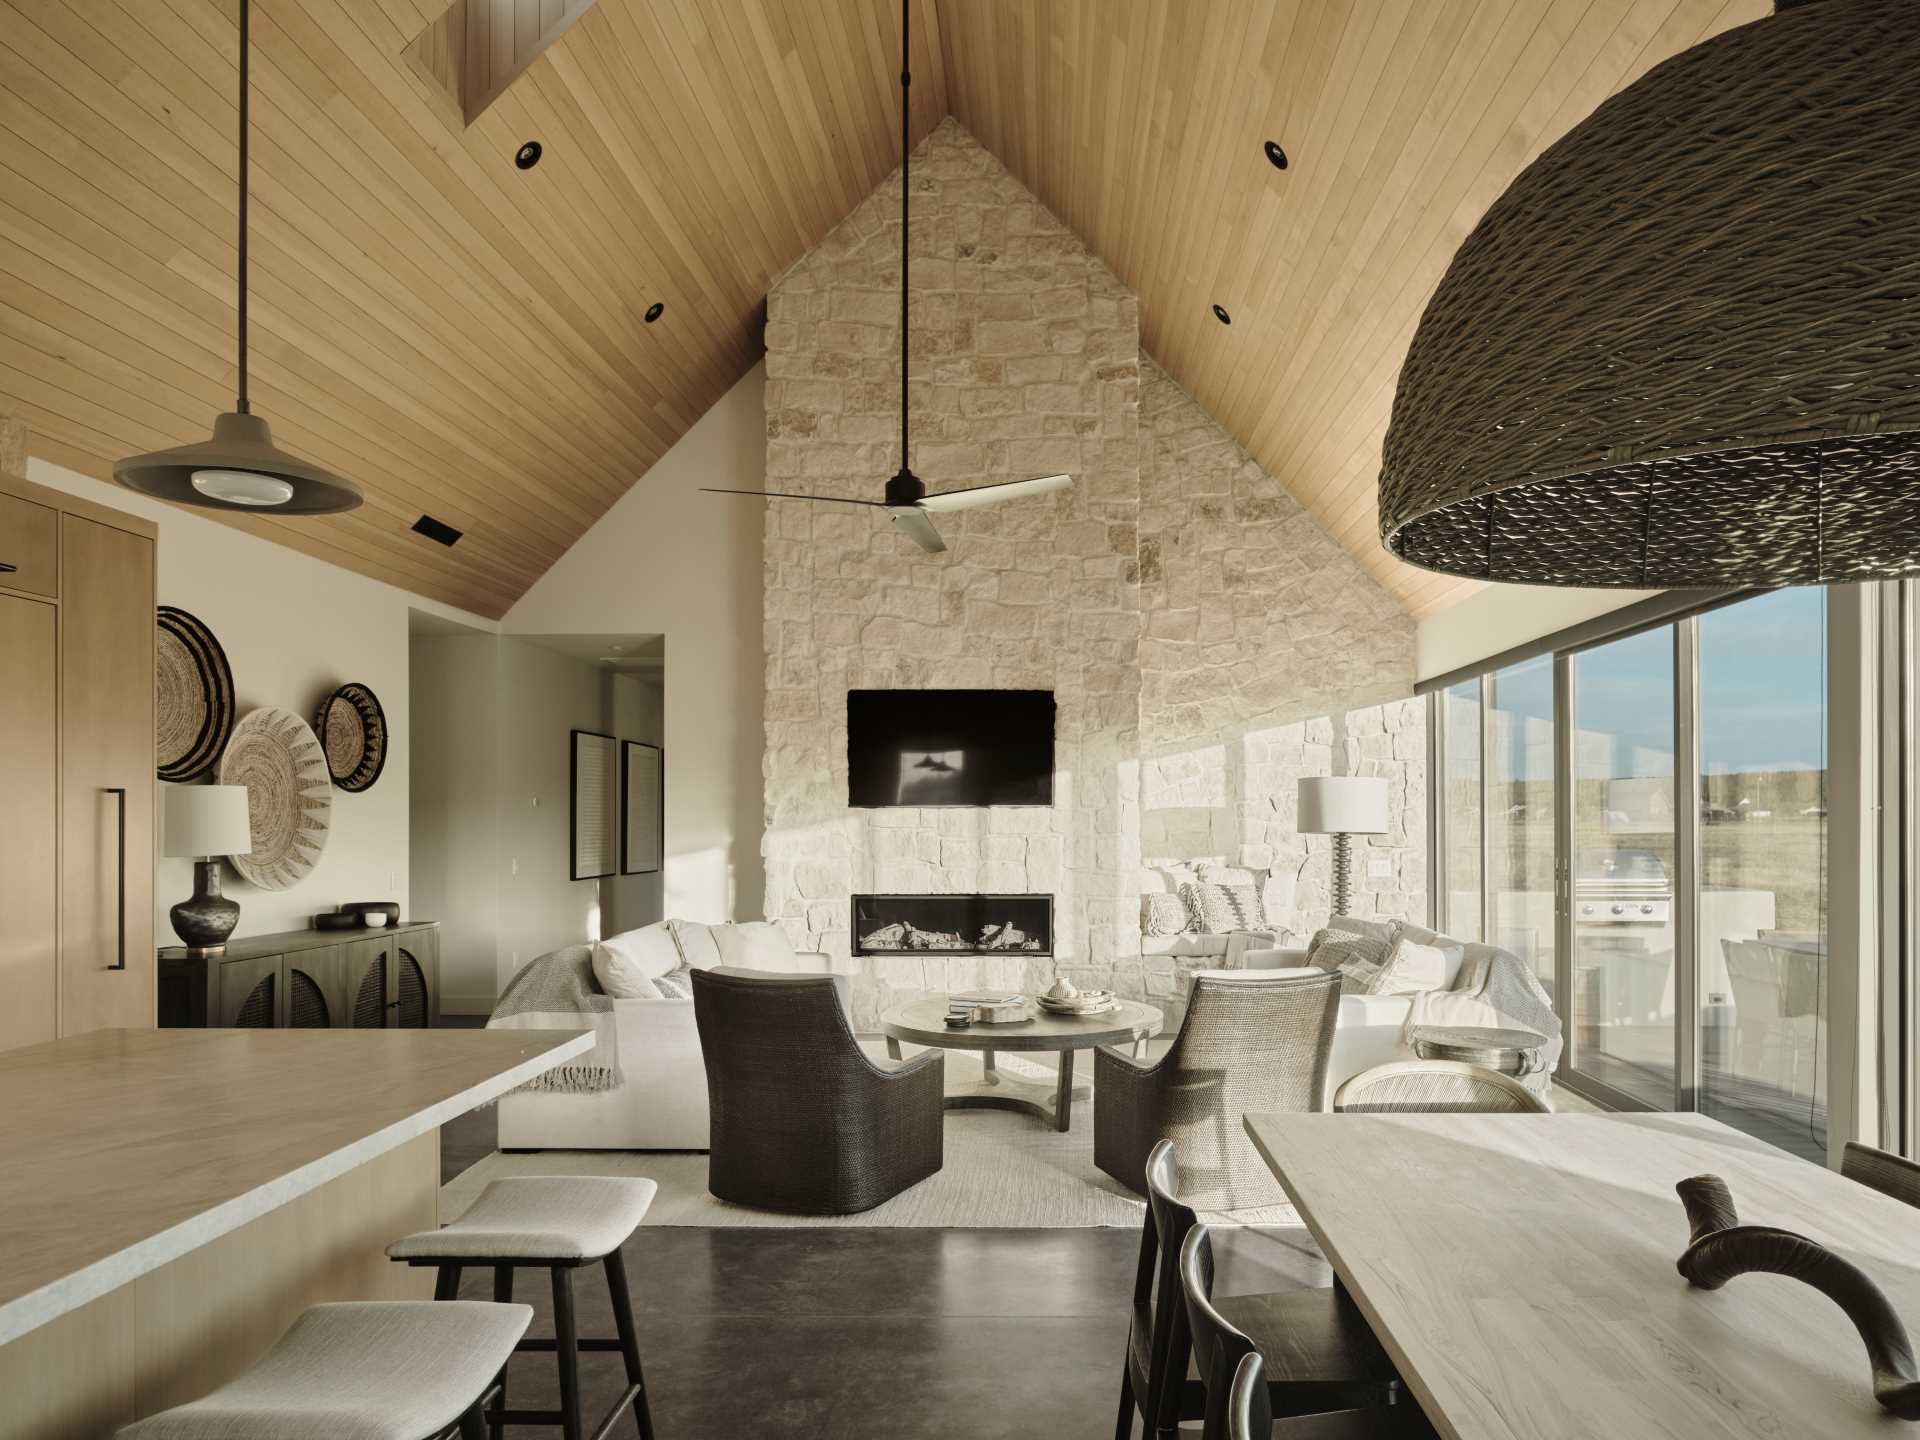 The interior of this modern home is a strong contrast to the exterior, with the stone fireplace in the living room drawing the eye upward to the wood-lined ceiling.